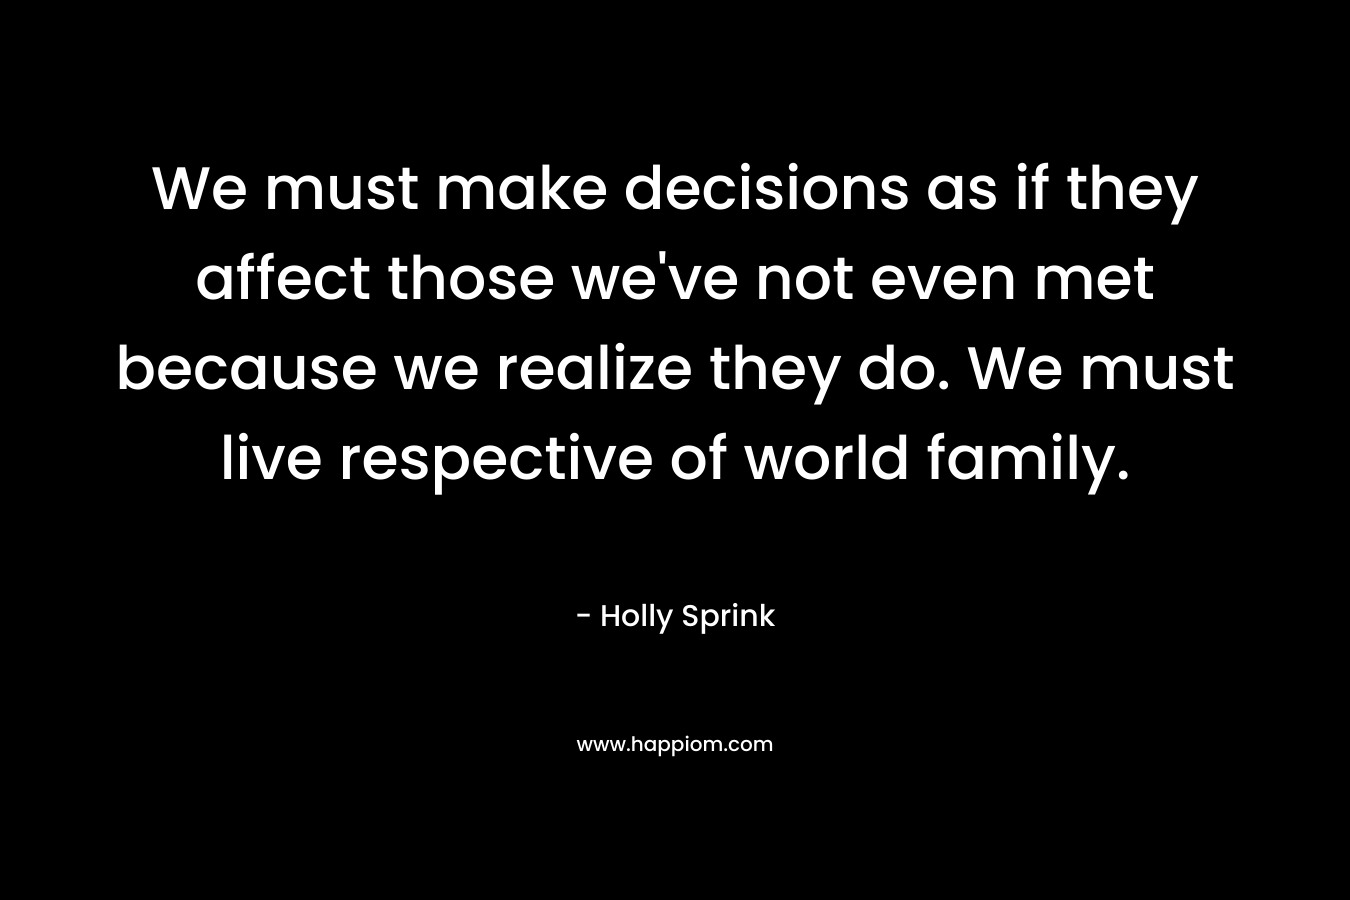 We must make decisions as if they affect those we’ve not even met because we realize they do. We must live respective of world family. – Holly Sprink